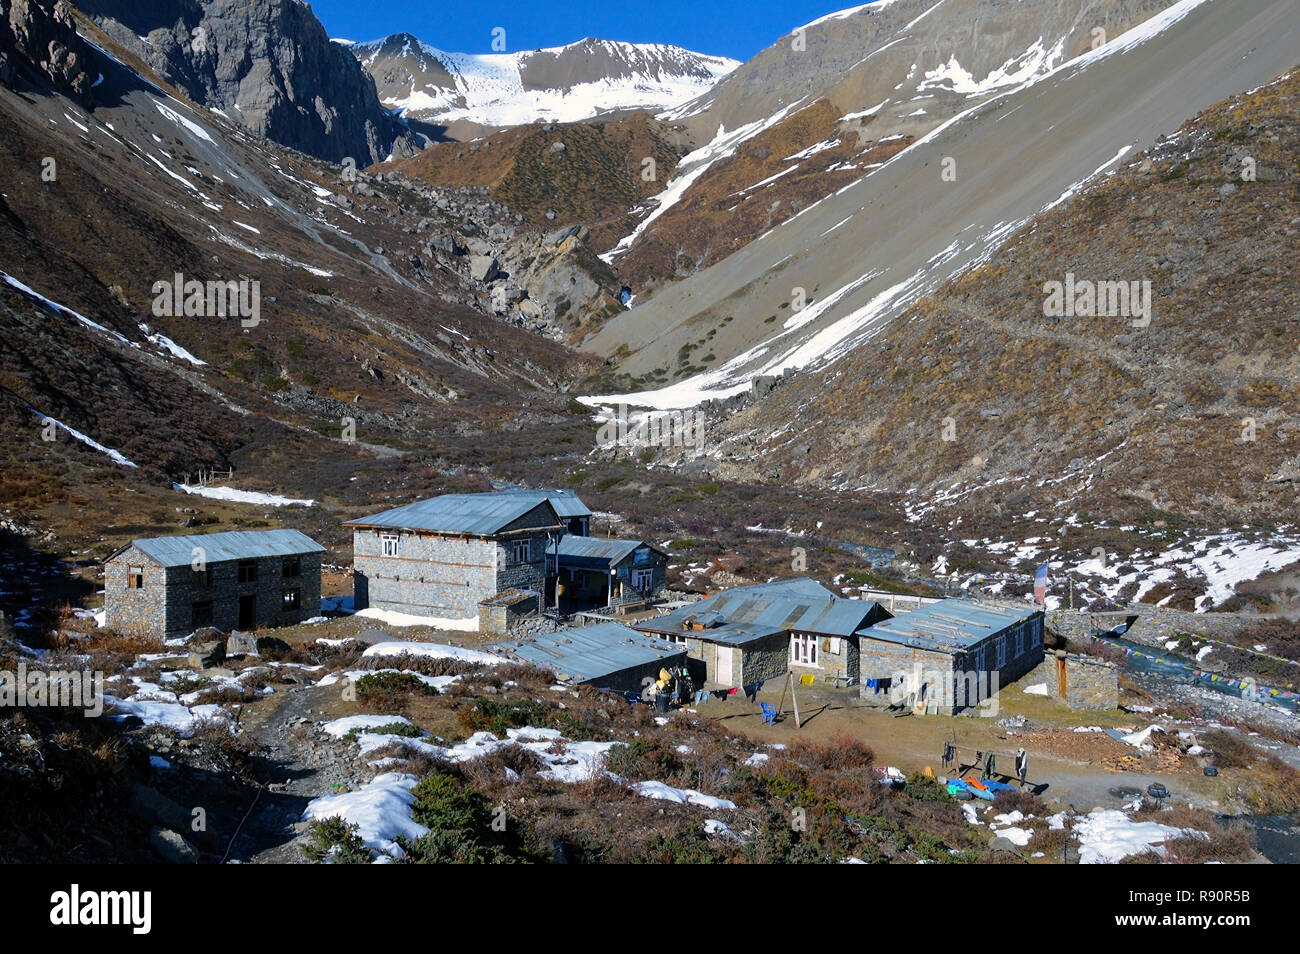 Tilicho Lake Base Camp, A side trek from the Annapurna Circuit, Nepal. The  buildings and lodges surrounded mountains and snow capped peaks Stock Photo  - Alamy